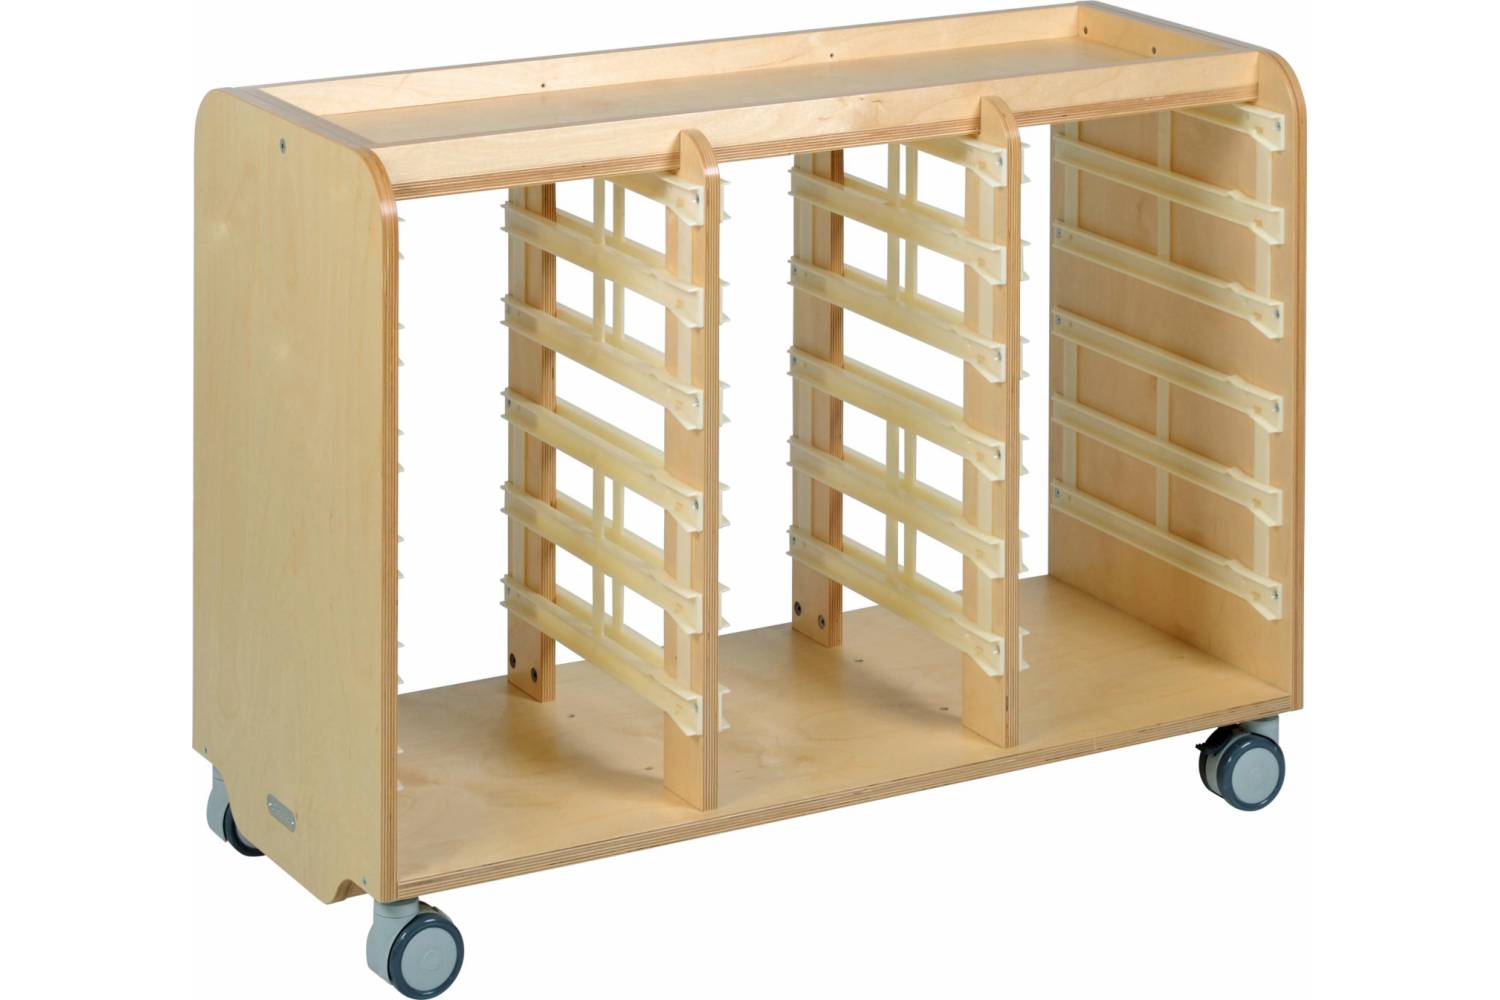 Bare unit showing tray runners. Tote trays sold separately.